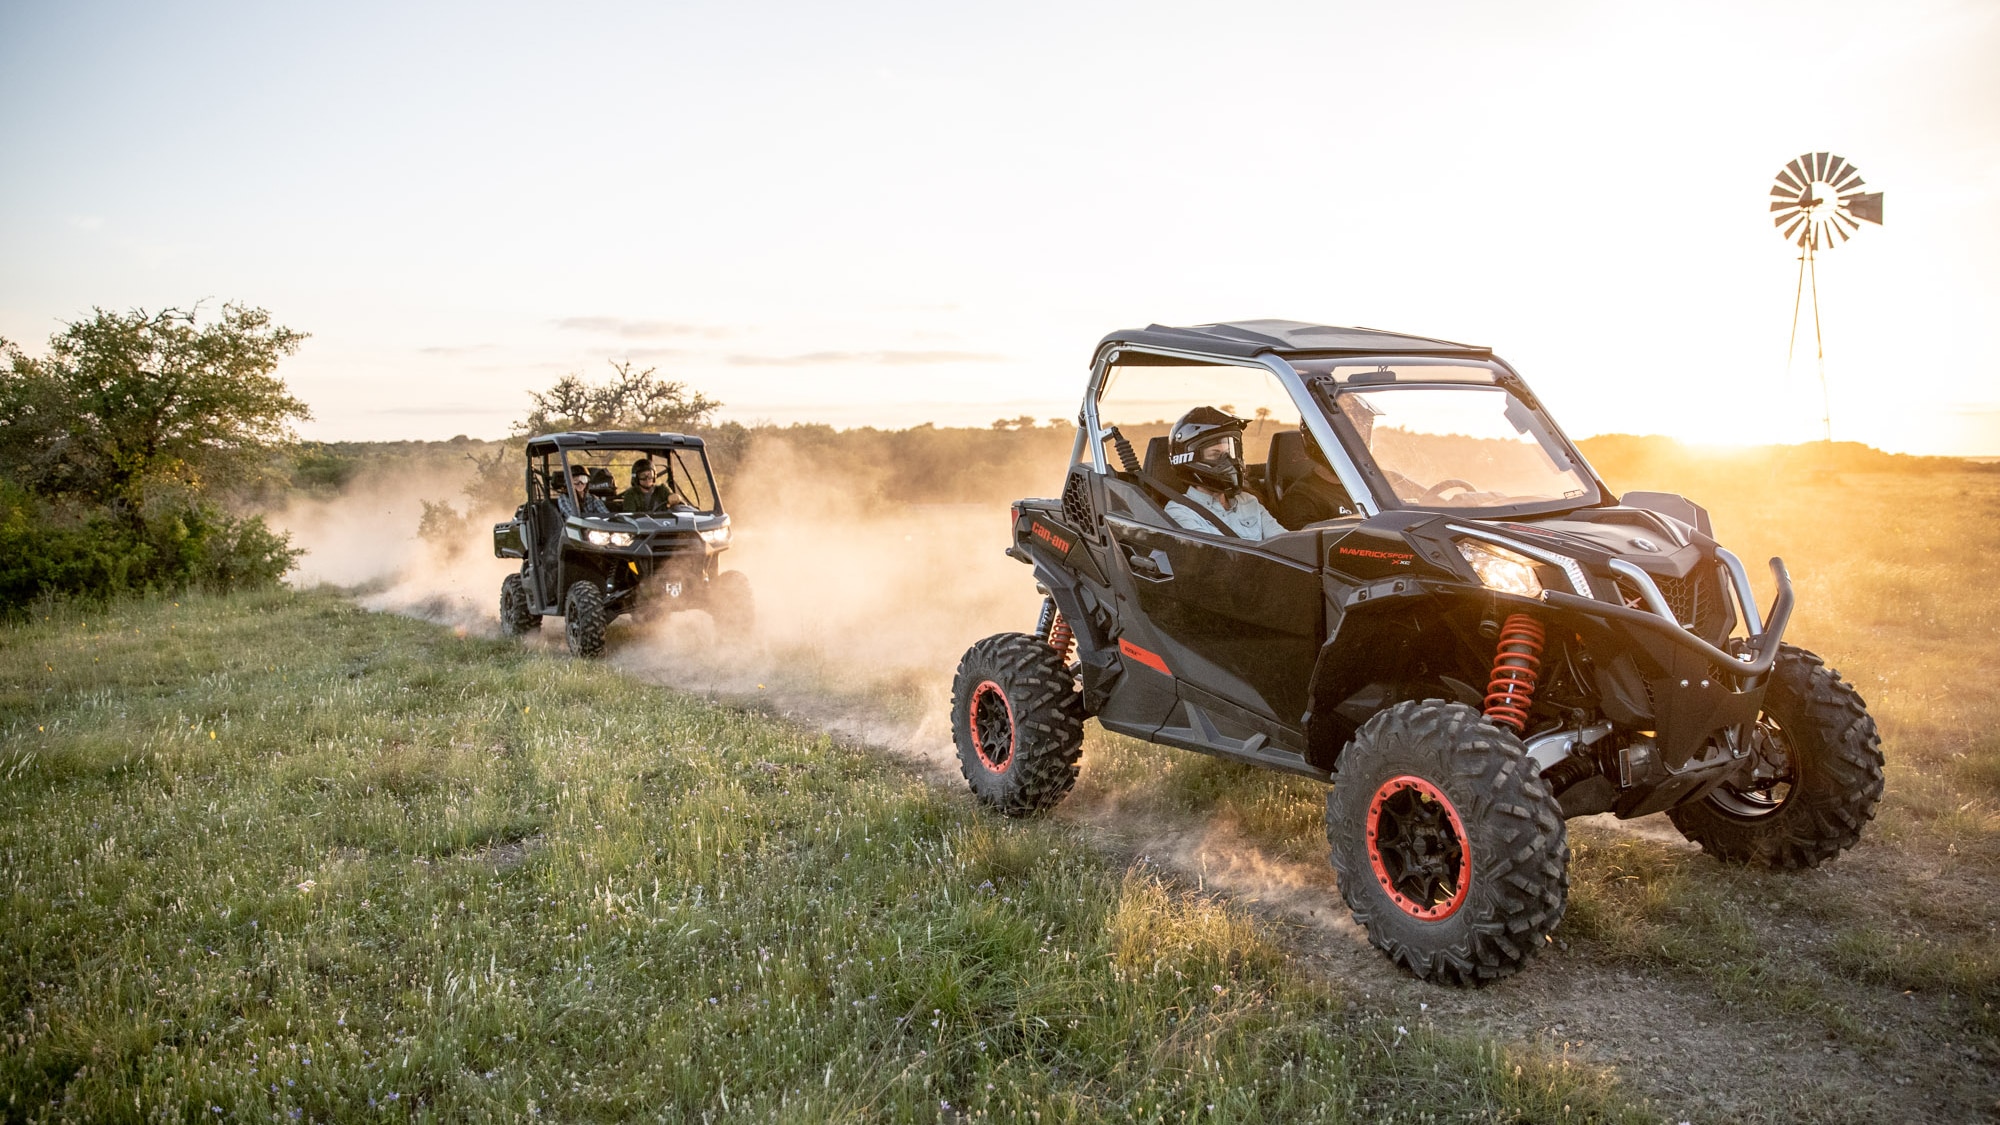 People riding Can-Am Maverick Sport X xc and Can-Am Defender XT side-by-sides in a trail